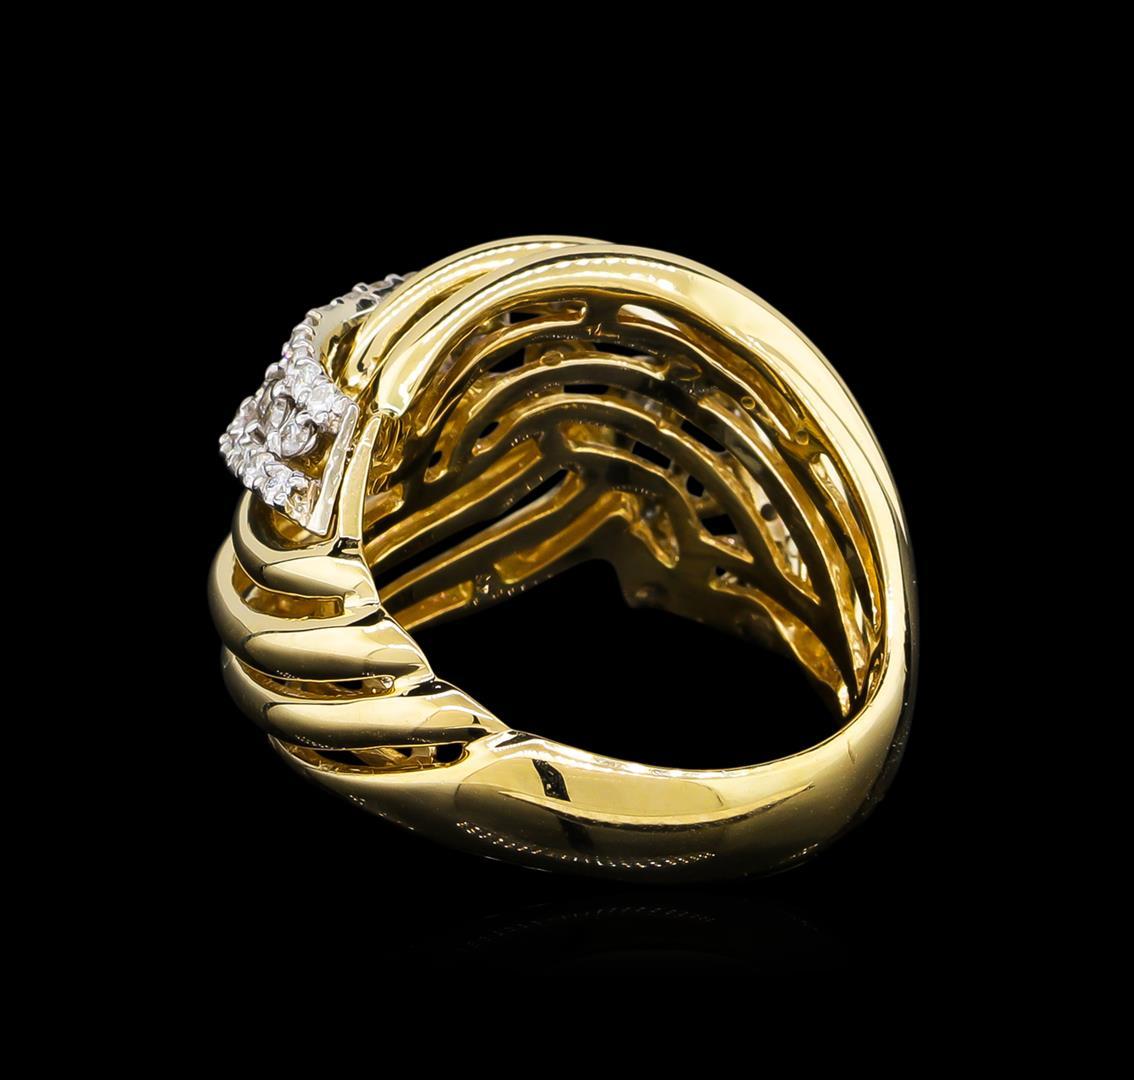 0.73 ctw Diamond Ring - 14KT Two-Tone Gold